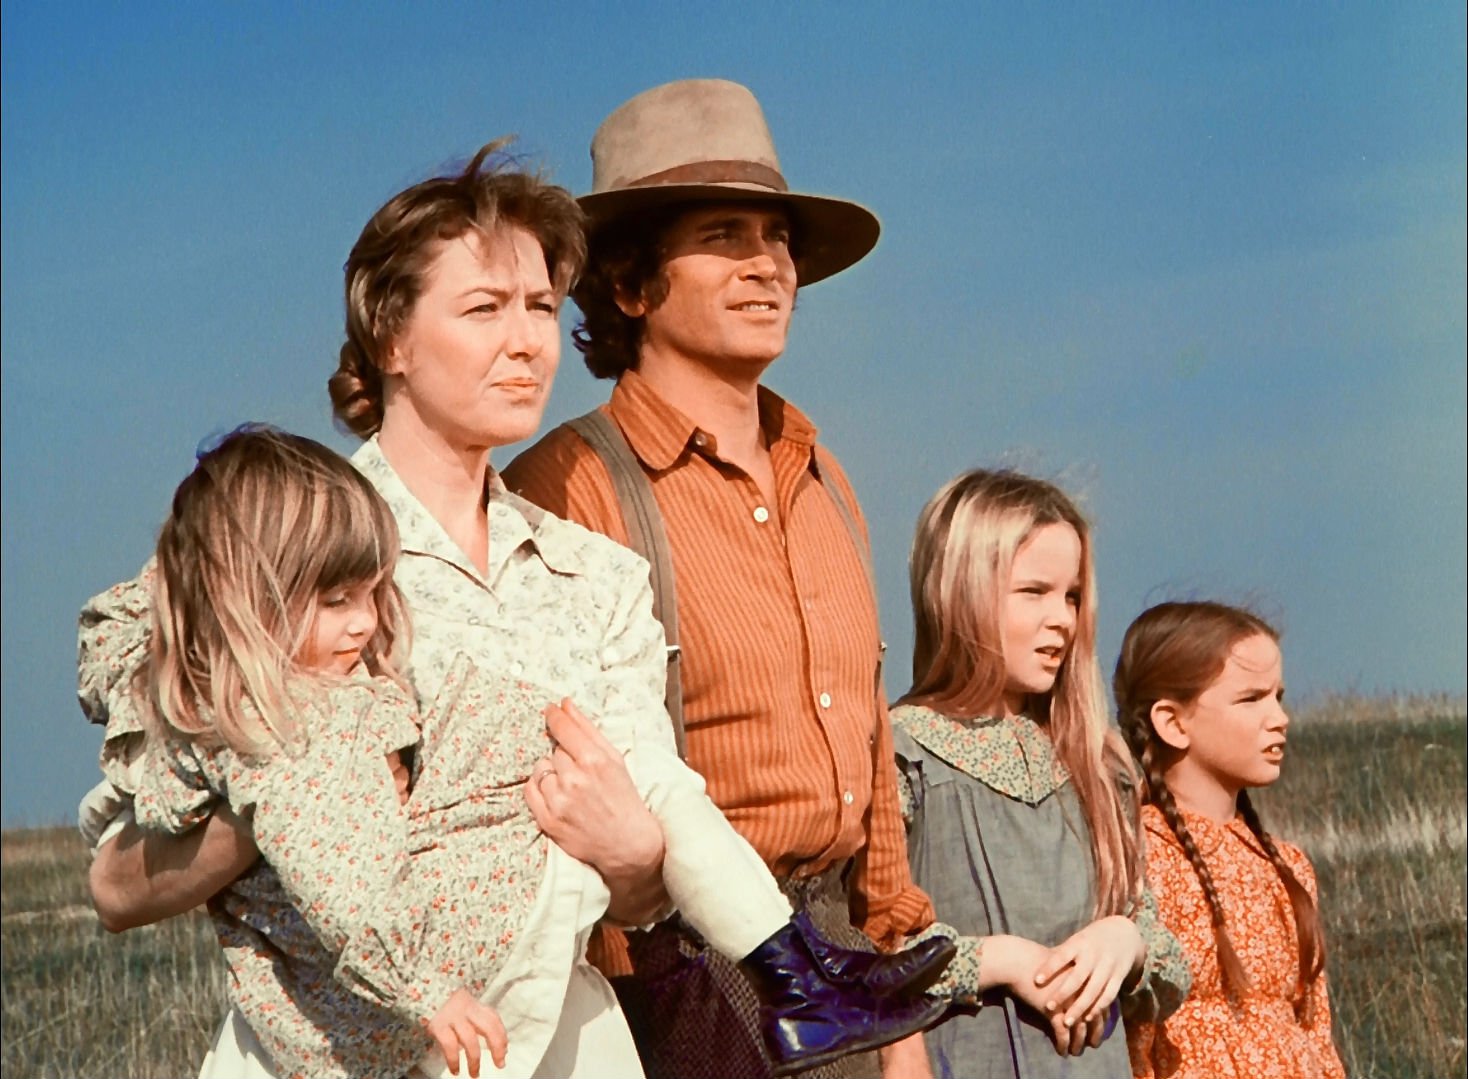 How Well Do You Know “Little House on the Prairie”? 20